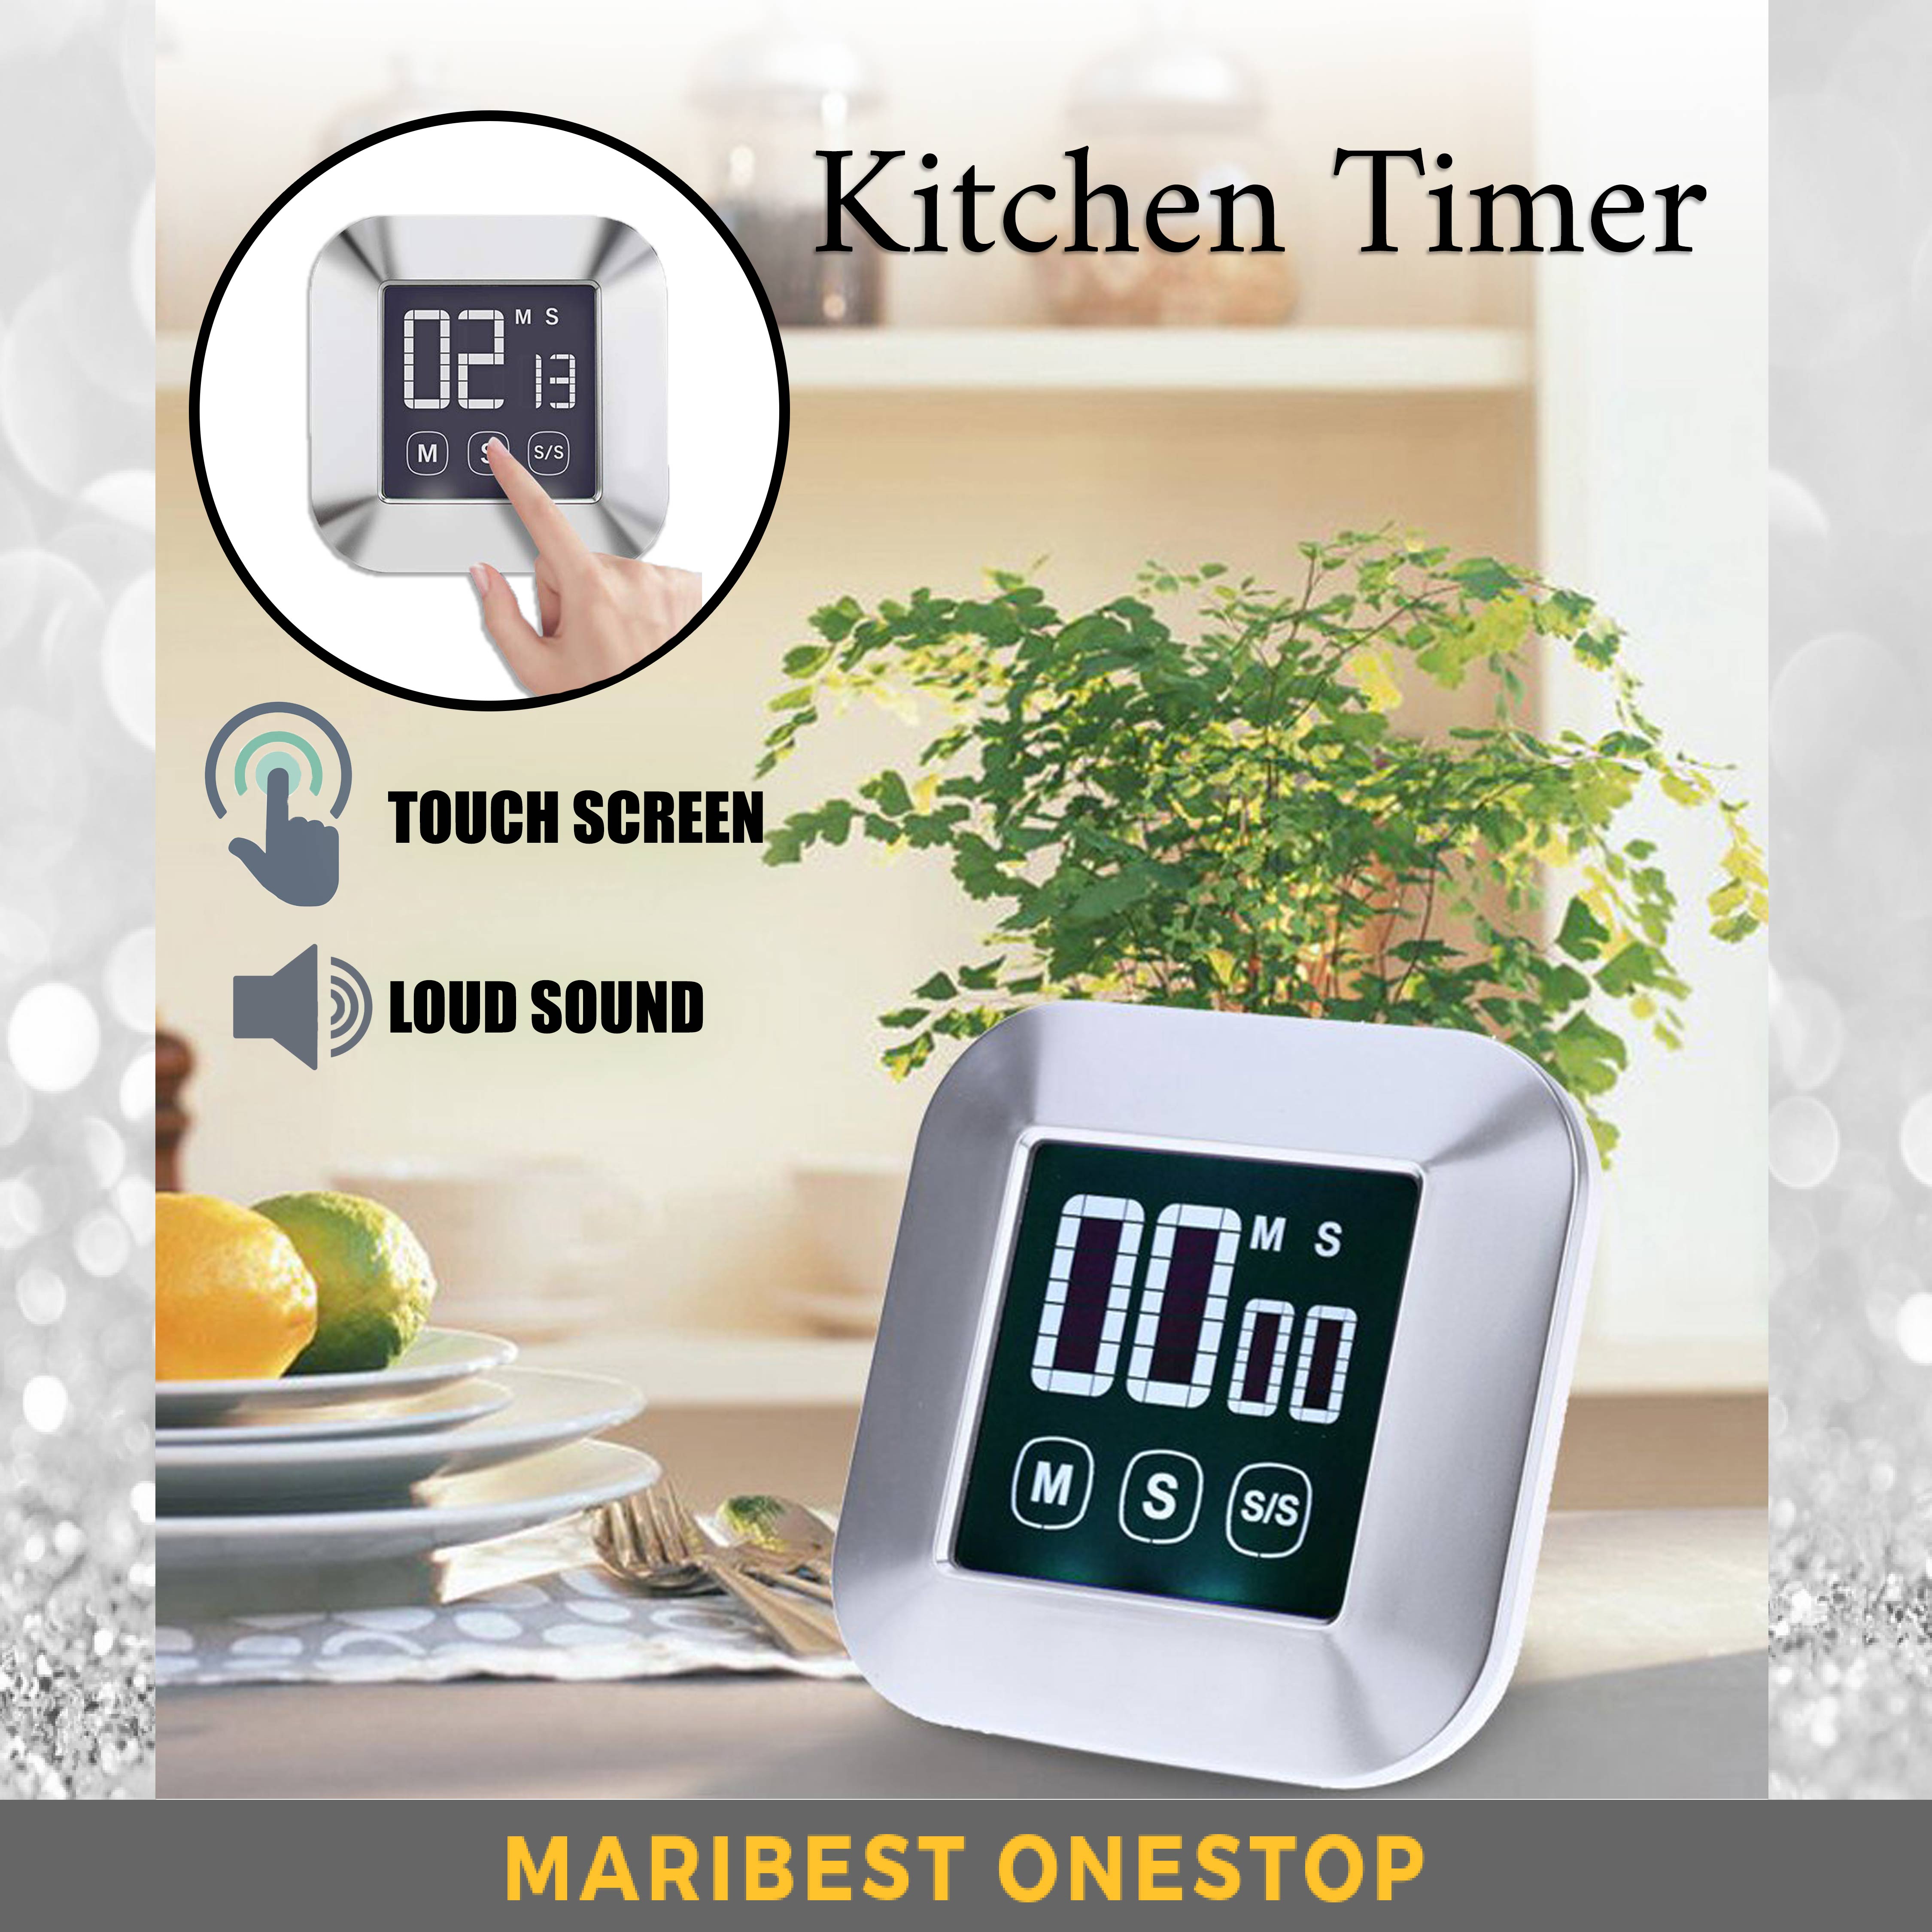 TS-83 Touch Screen Digital Kitchen Timer Silver Magnet Clock Countdown Large Screen for Cooking Exercise Tools Kitchen